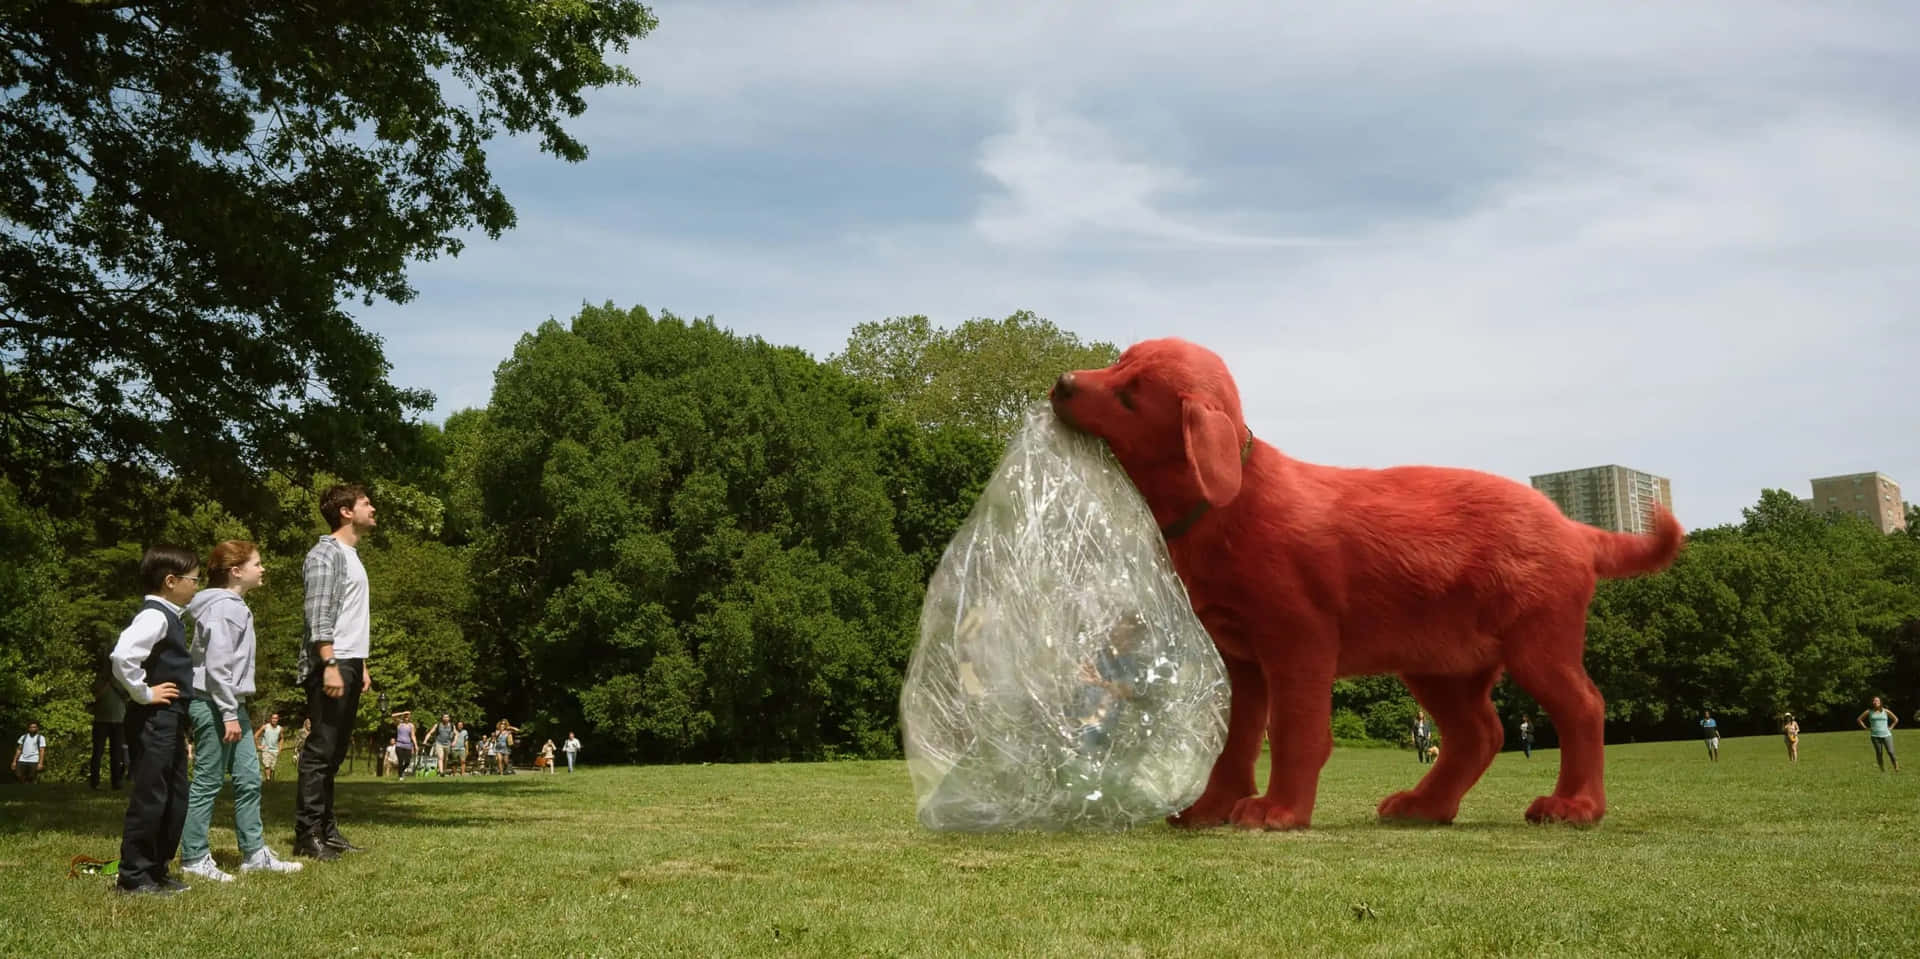 A Red Dog Is Standing In A Park With People